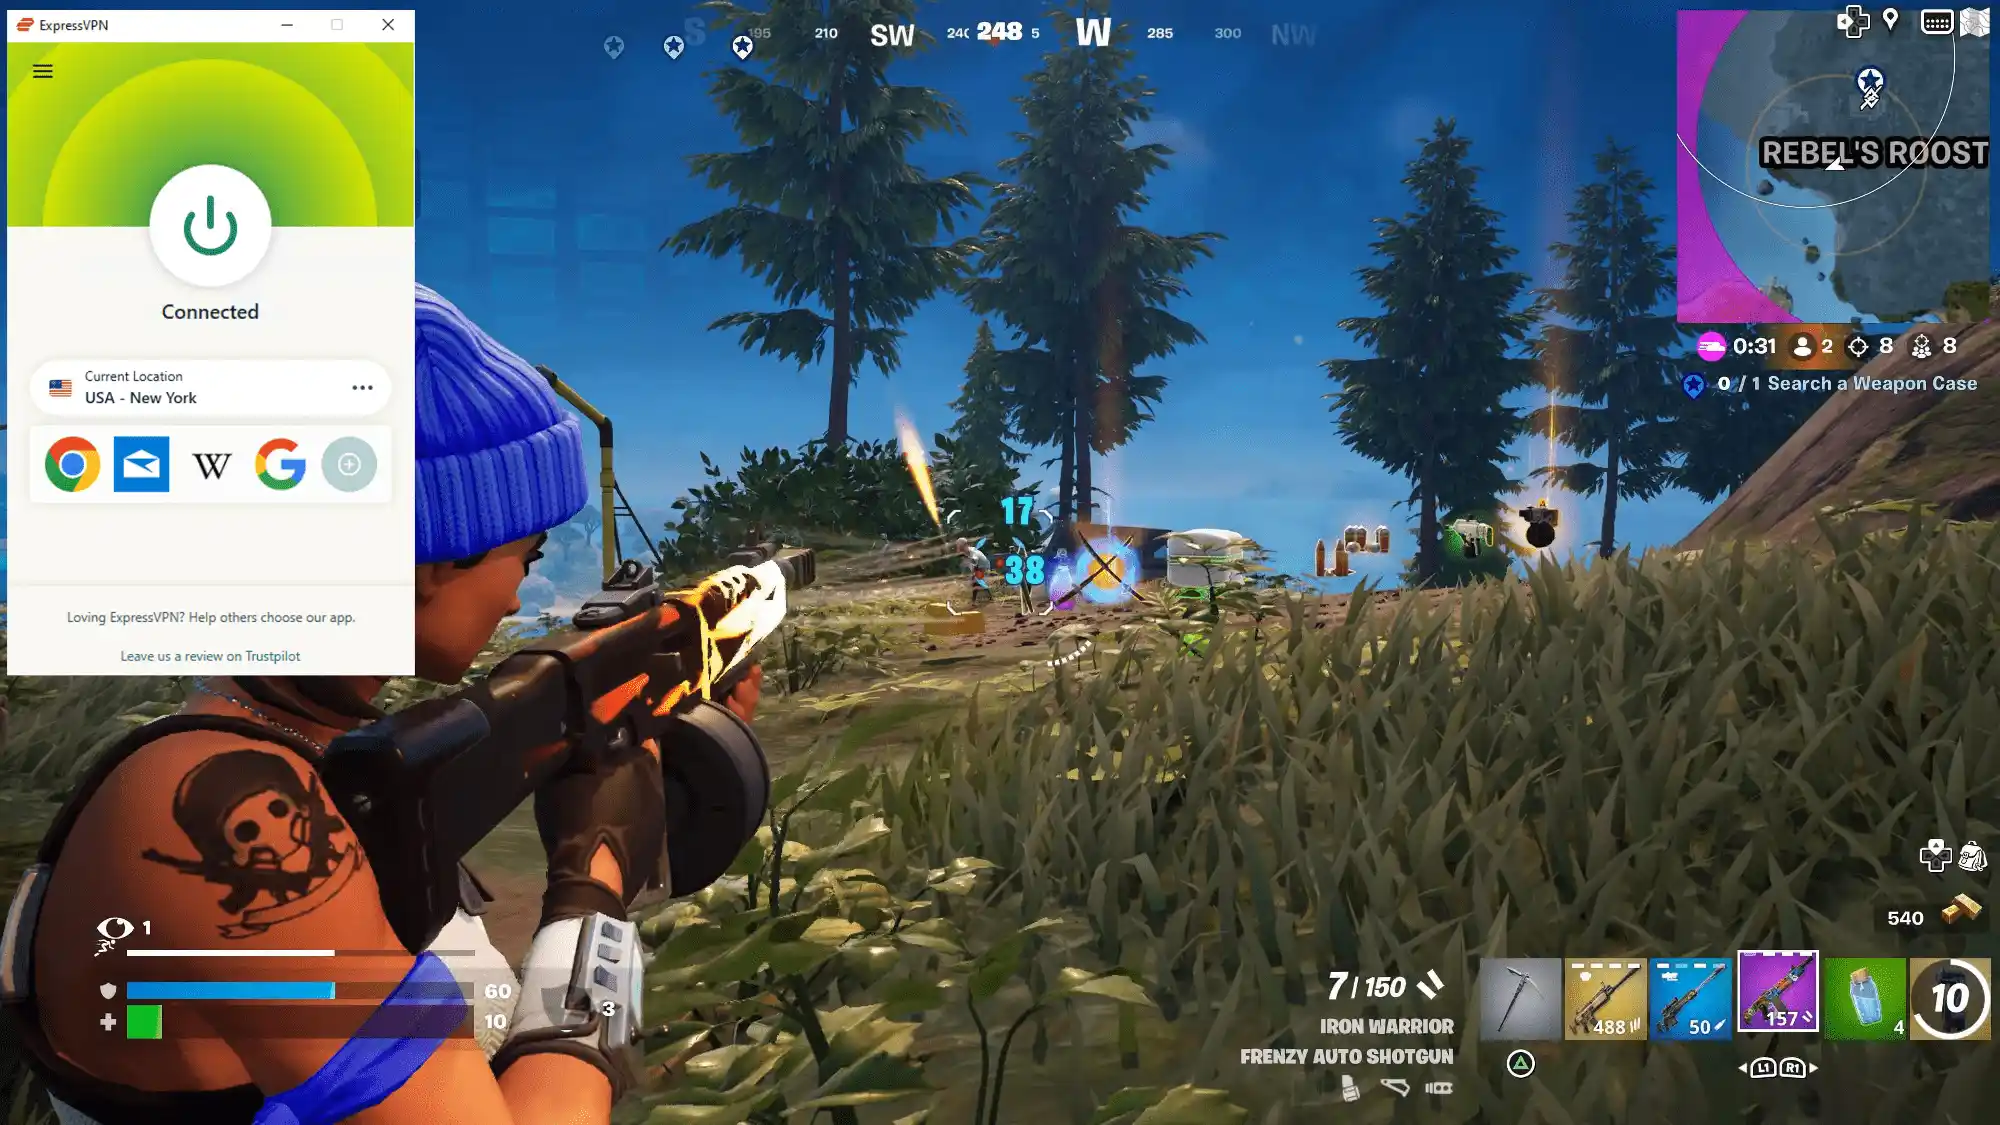 Screenshot of Fortnite on a PS5 console while connected to an ExpressVPN New York server.